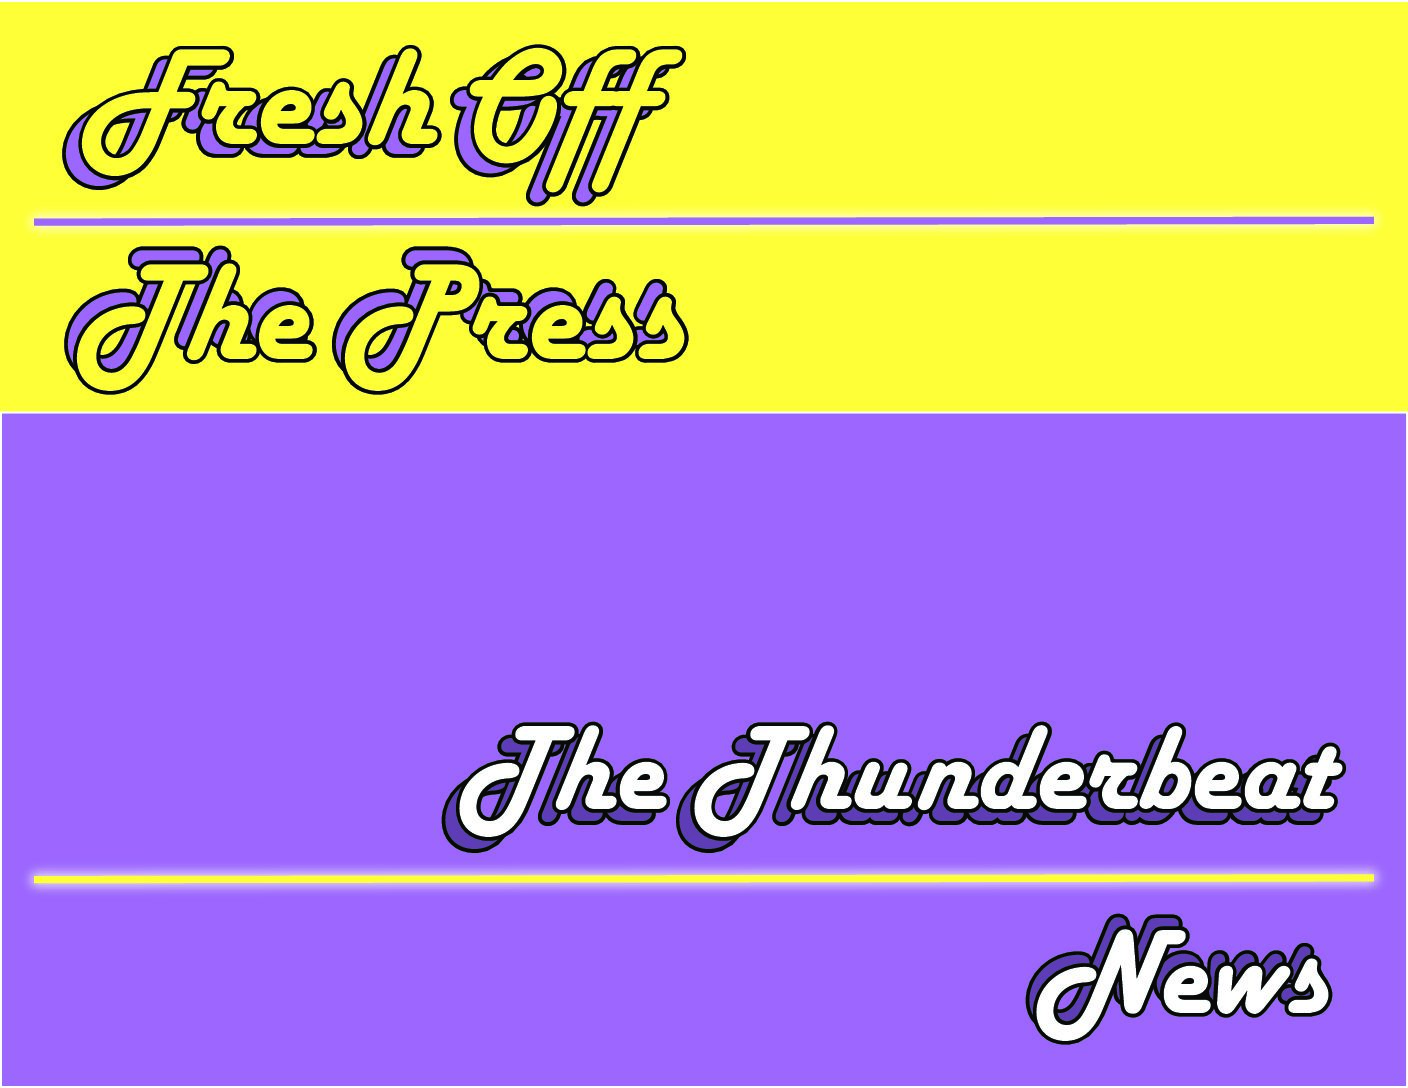 Weekly news presented by The Thunderbeat with Shane Daughtrey